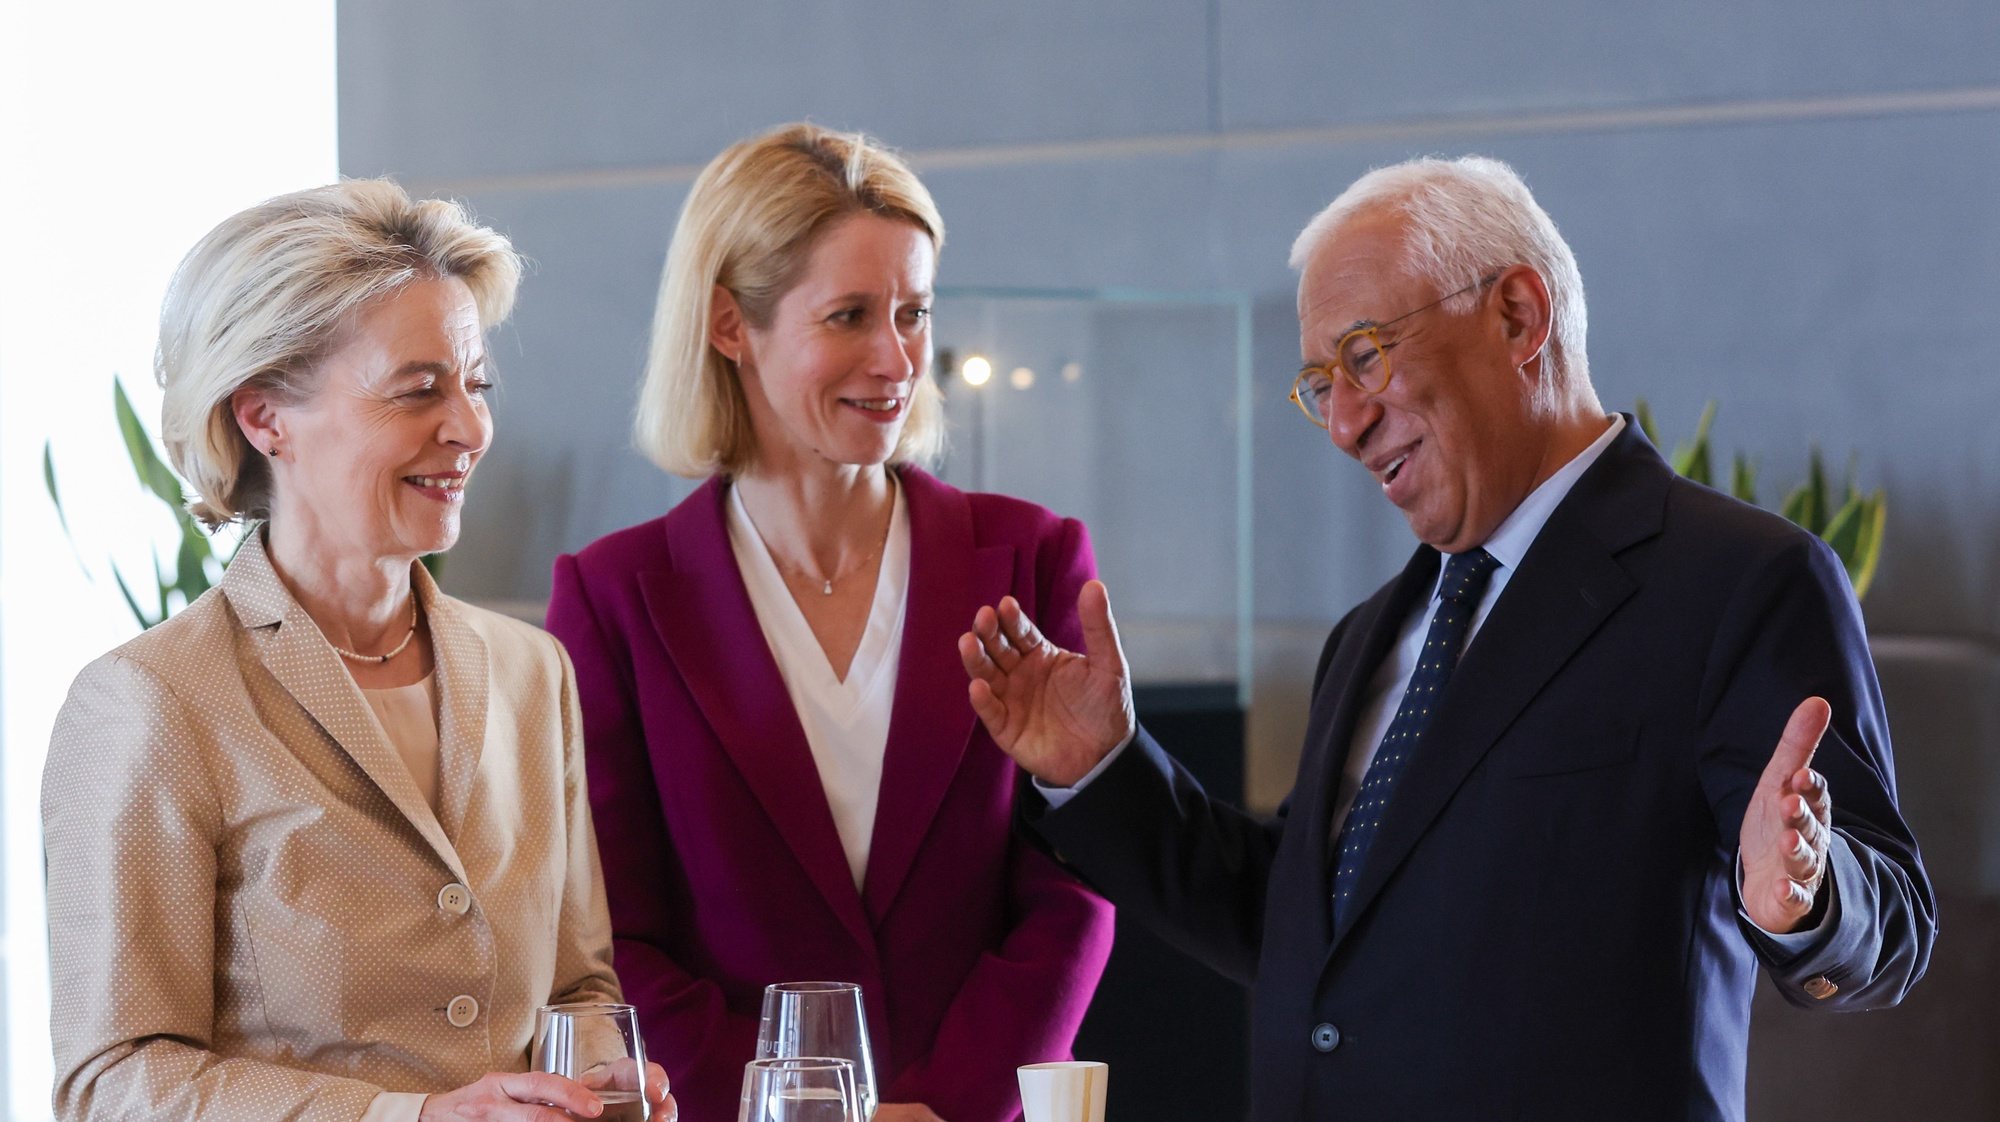 epa11443267 (L-R) European Commission President Ursula Von der Leyen, Estonian Prime Minister Kaja Kallas, and former Portuguese Prime Minister Antonio Costa, during a meeting  at Brussels Airport, a day after the EU summit in Brussels, Belgium, 28 June 2024. EU leaders agreed on proposing Ursula Von der Leyen as candidate for President of the European Commission and Kaja Kallas as High Representative of the Union for Foreign Affairs and Security Policy, while Antonio Costa was elected as European Council President during a summit to discuss the Strategic Agenda 2024-2029, the next institutional cycle, Ukraine, the Middle East, competitiveness, security and defense, among other topics.  EPA/OLIVIER HOSLET / POOL